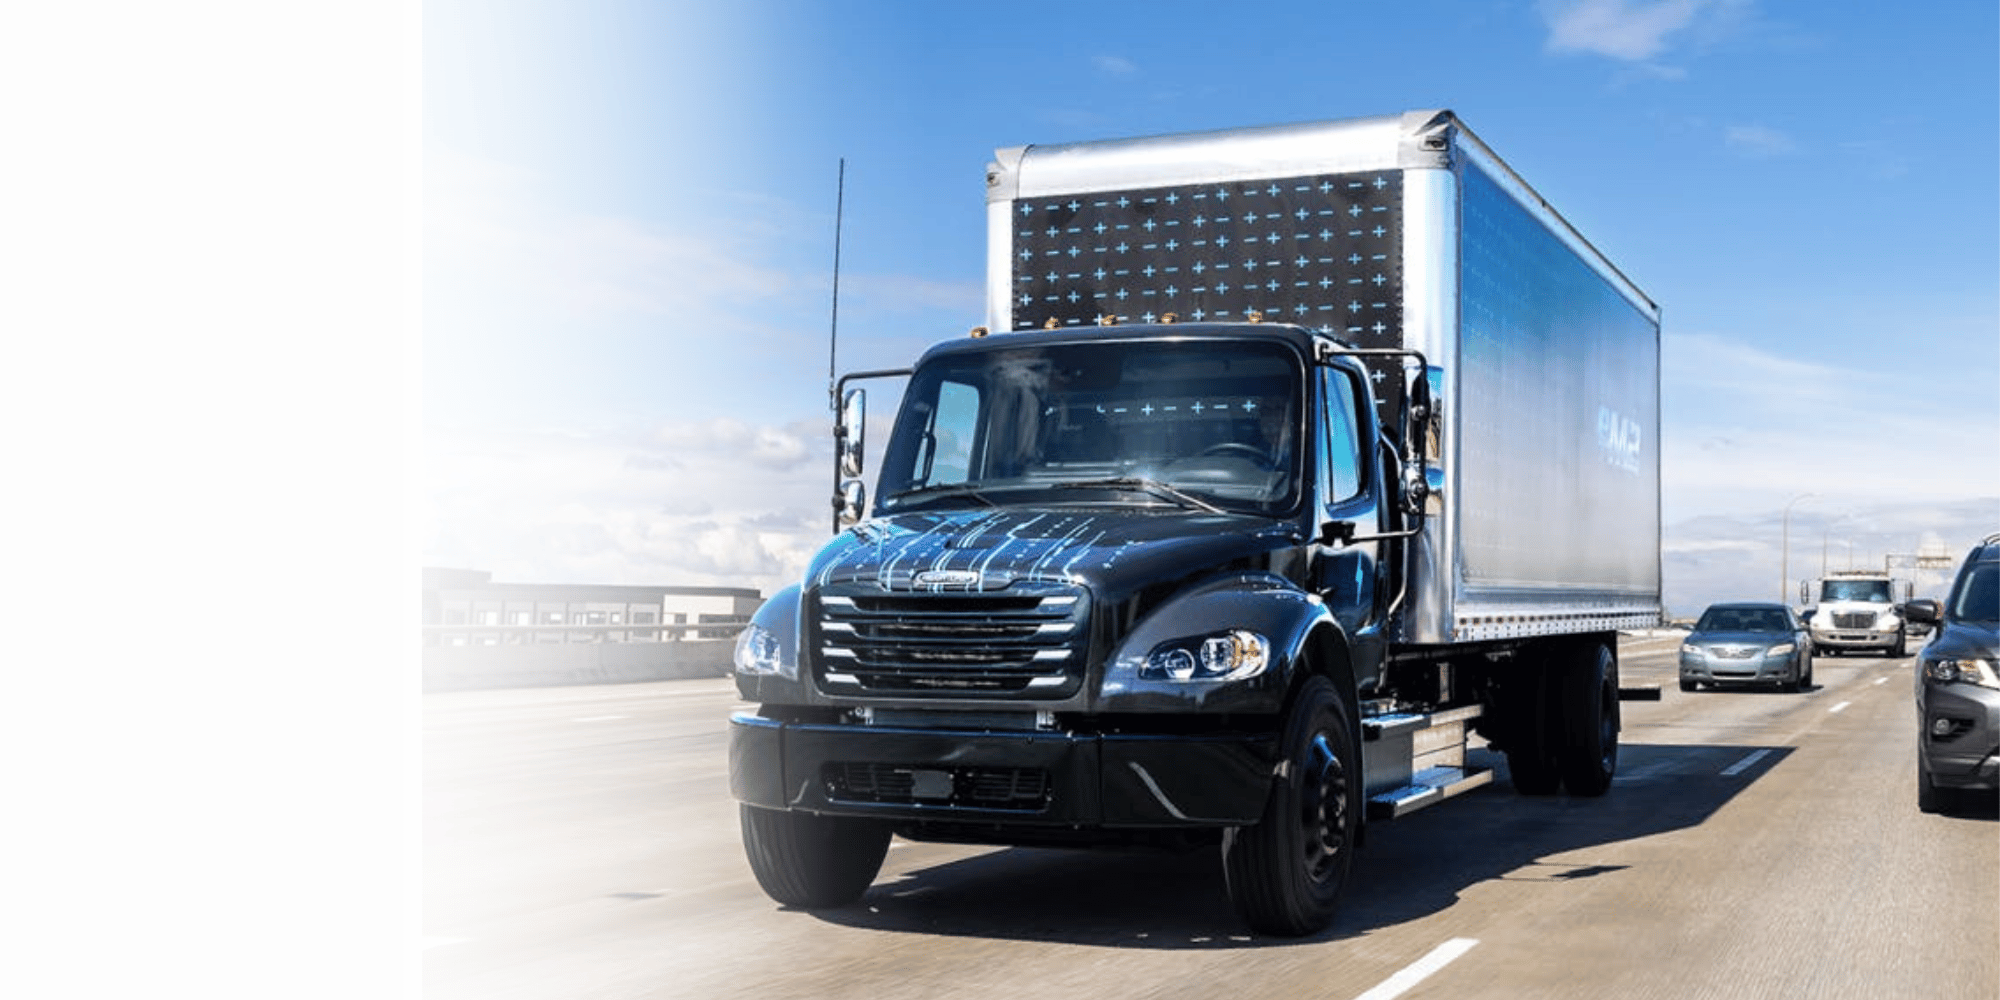 The Landscape of Freightliner and Logistics